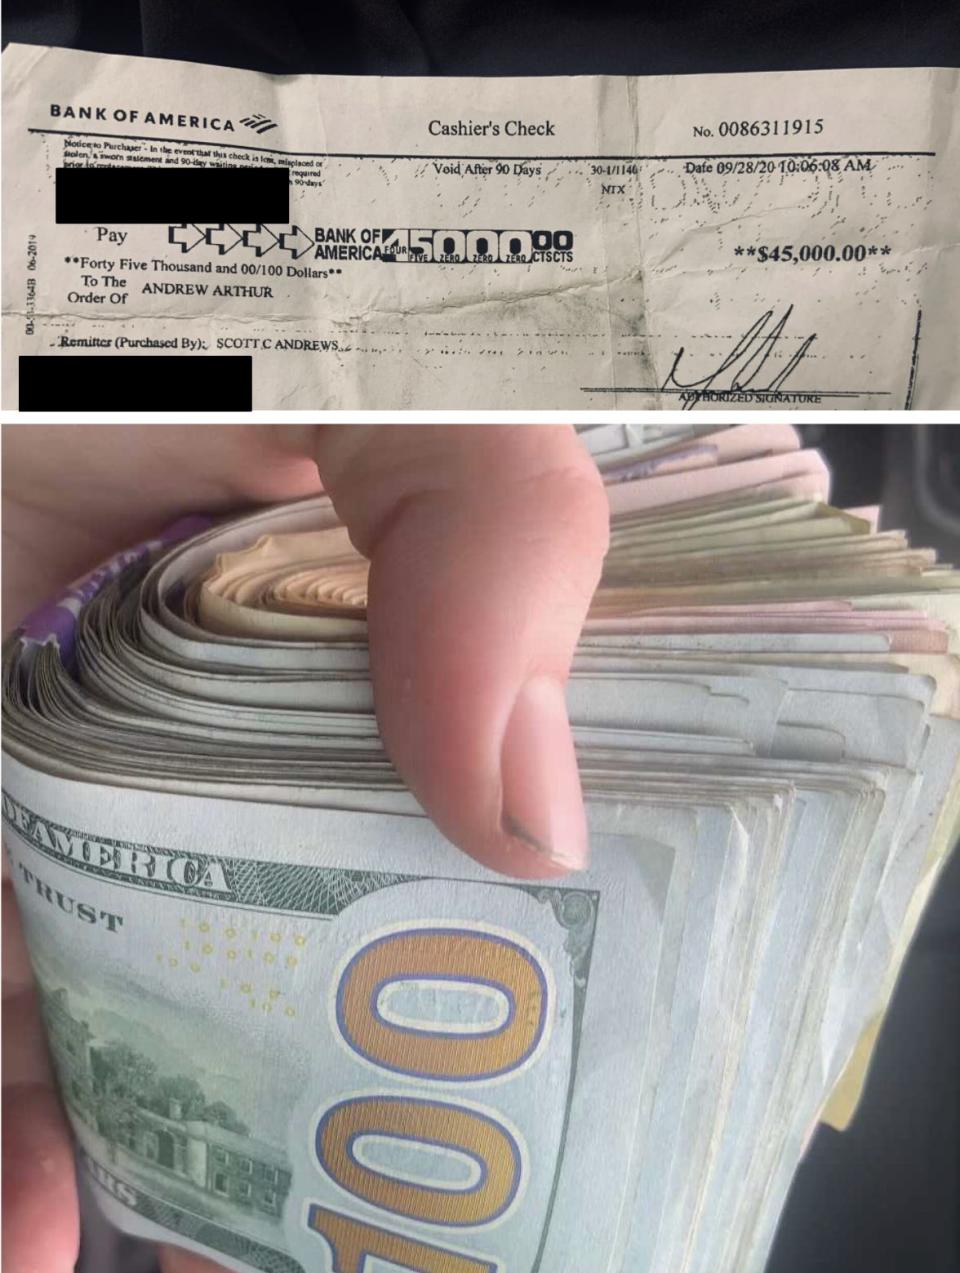 Another image of the alleged cashier's check receipt and an image of the money that was allegedly withdrawn from it.